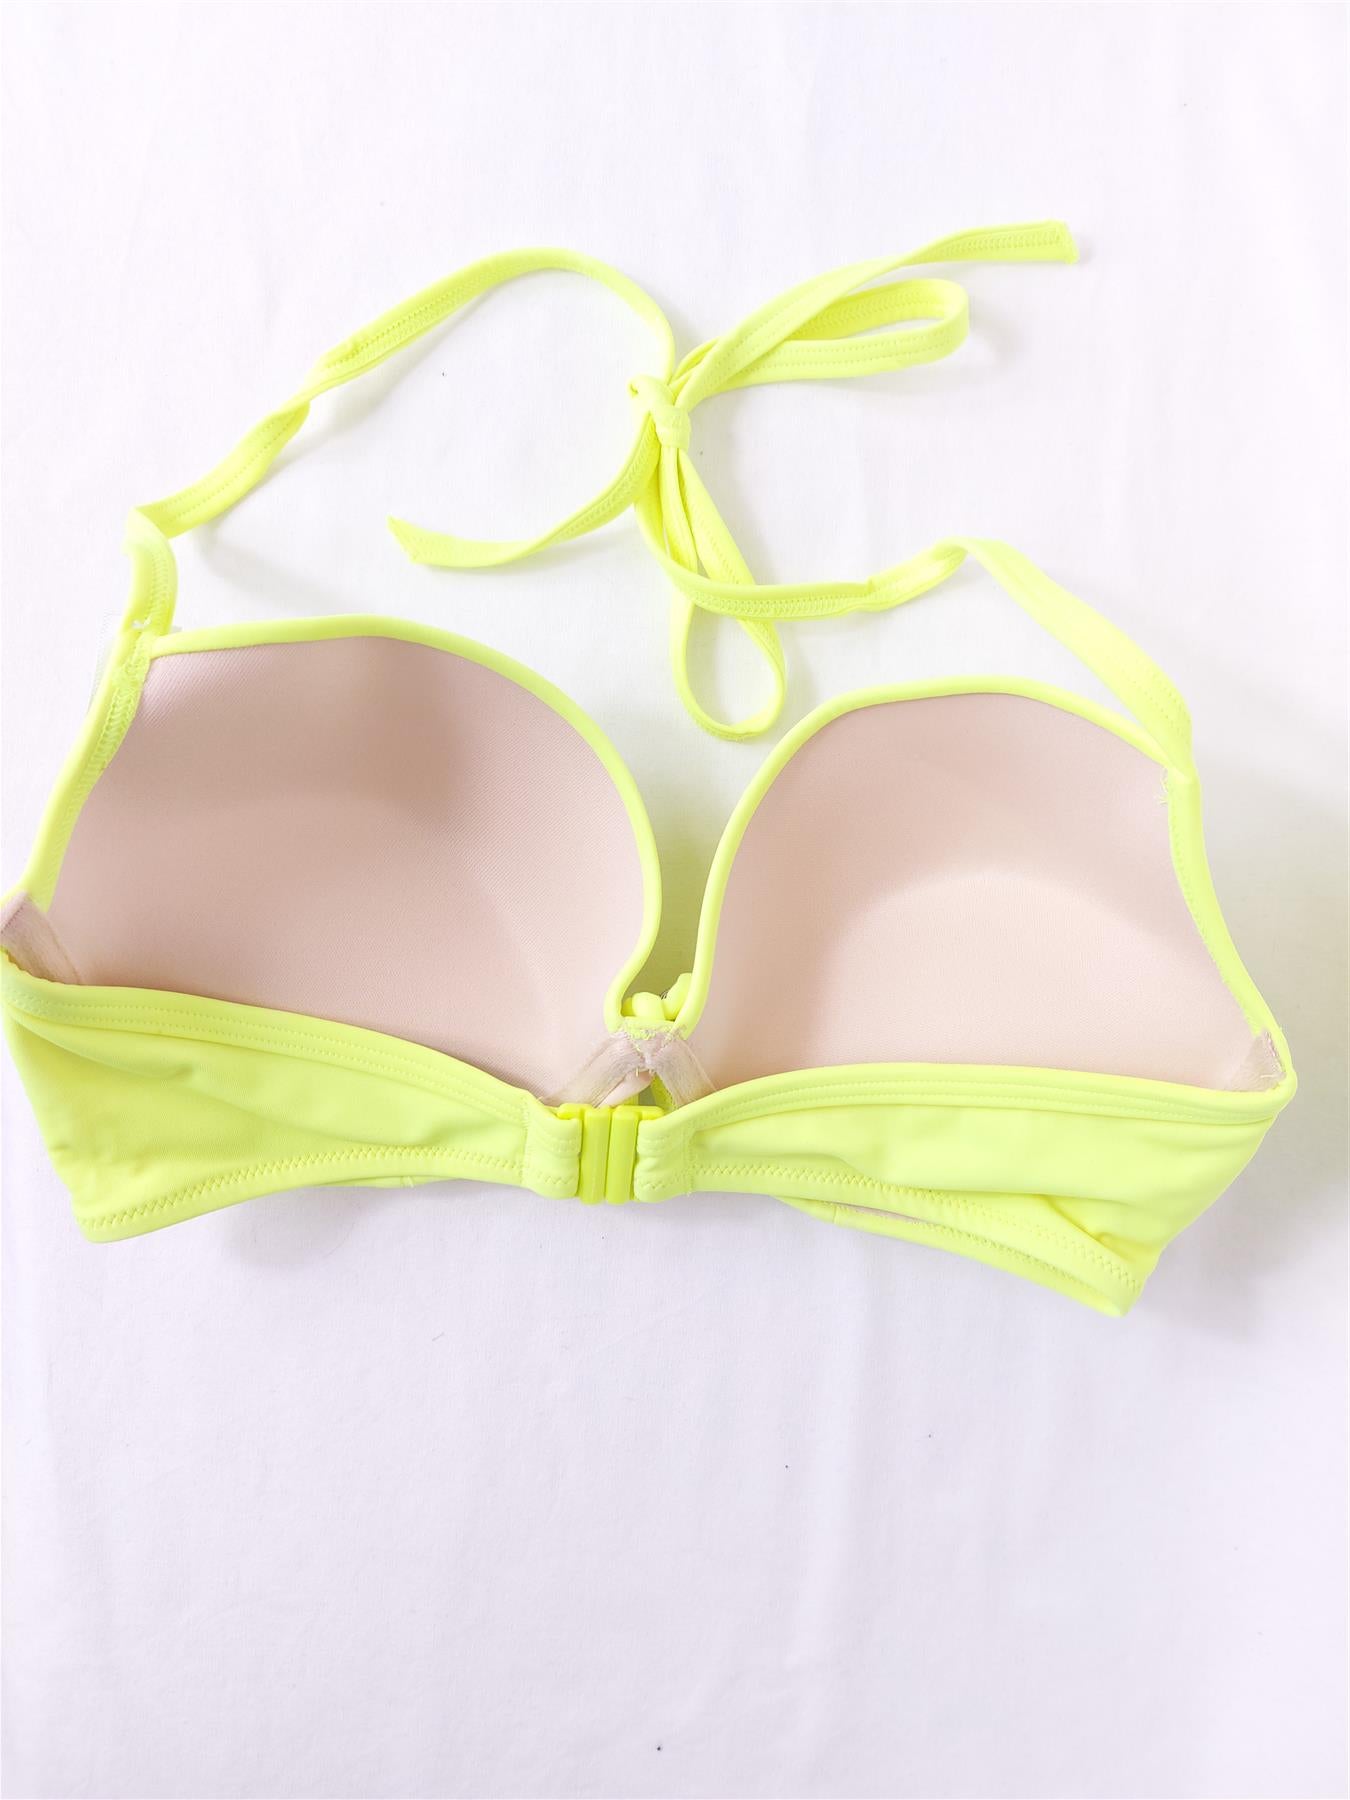 Boux Avenue  Bikini Top and/or Briefs (Sold Seperately)